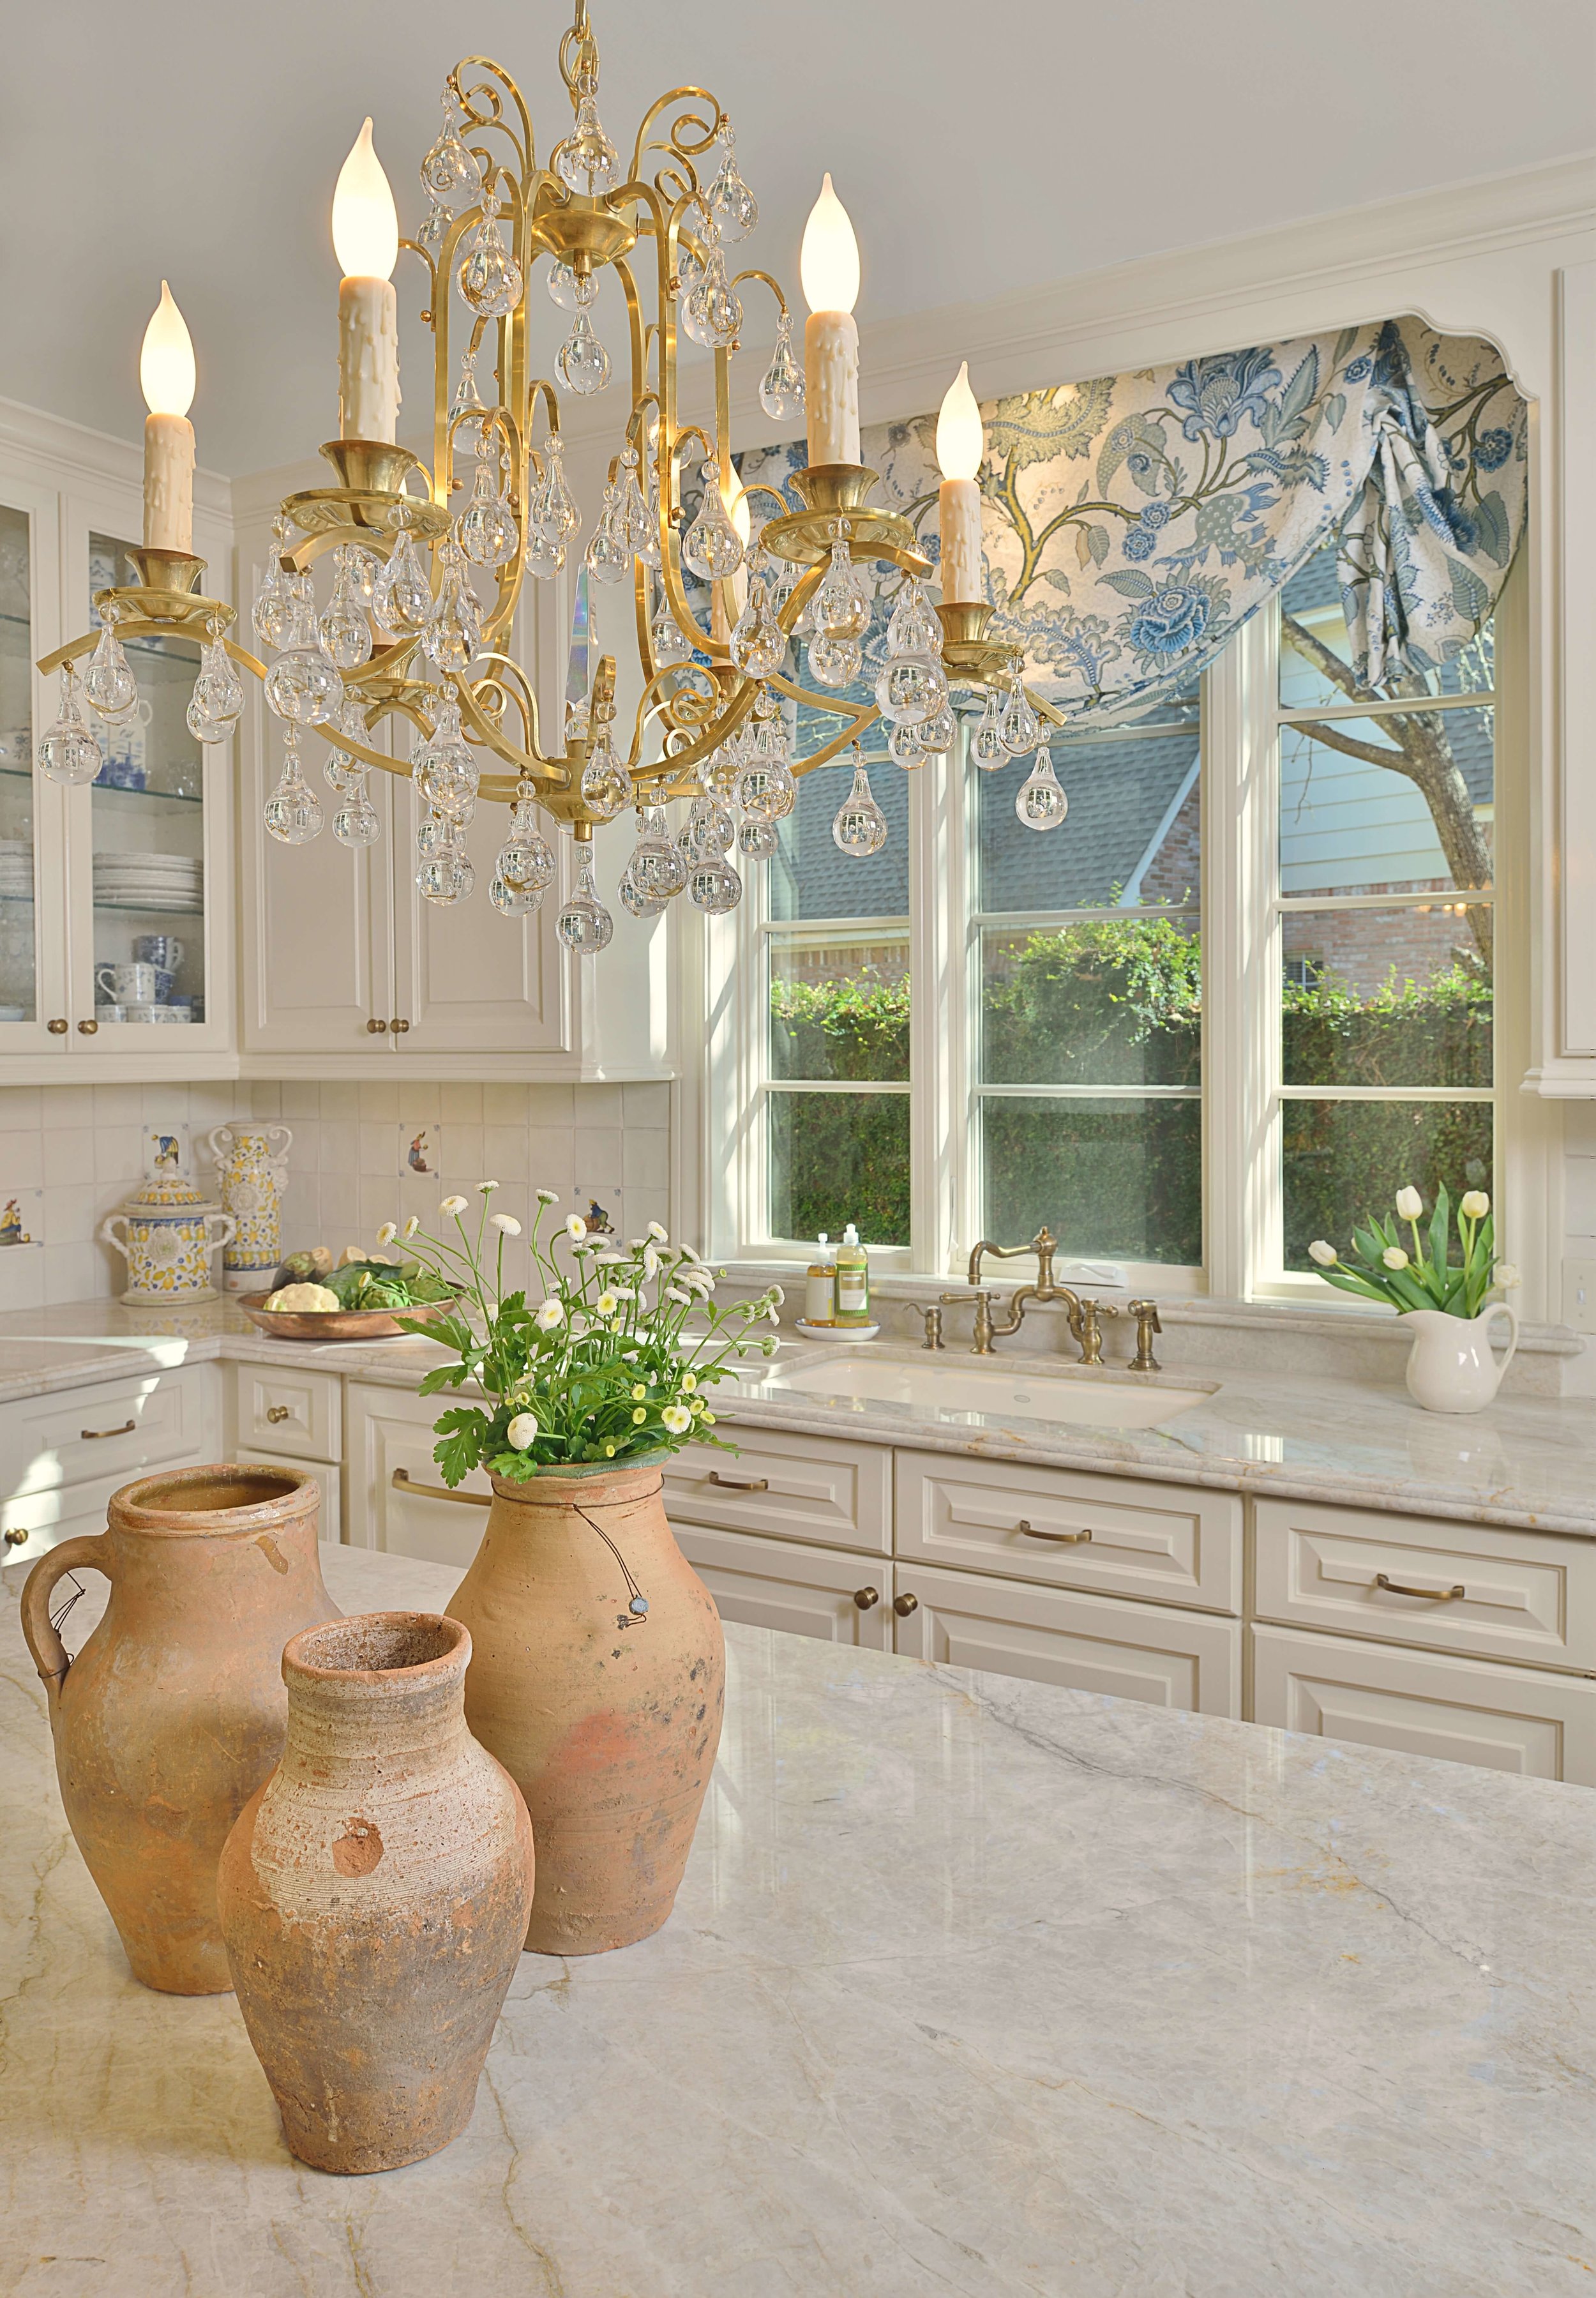 7 Considerations For Kitchen Island Pendant Lighting Selection